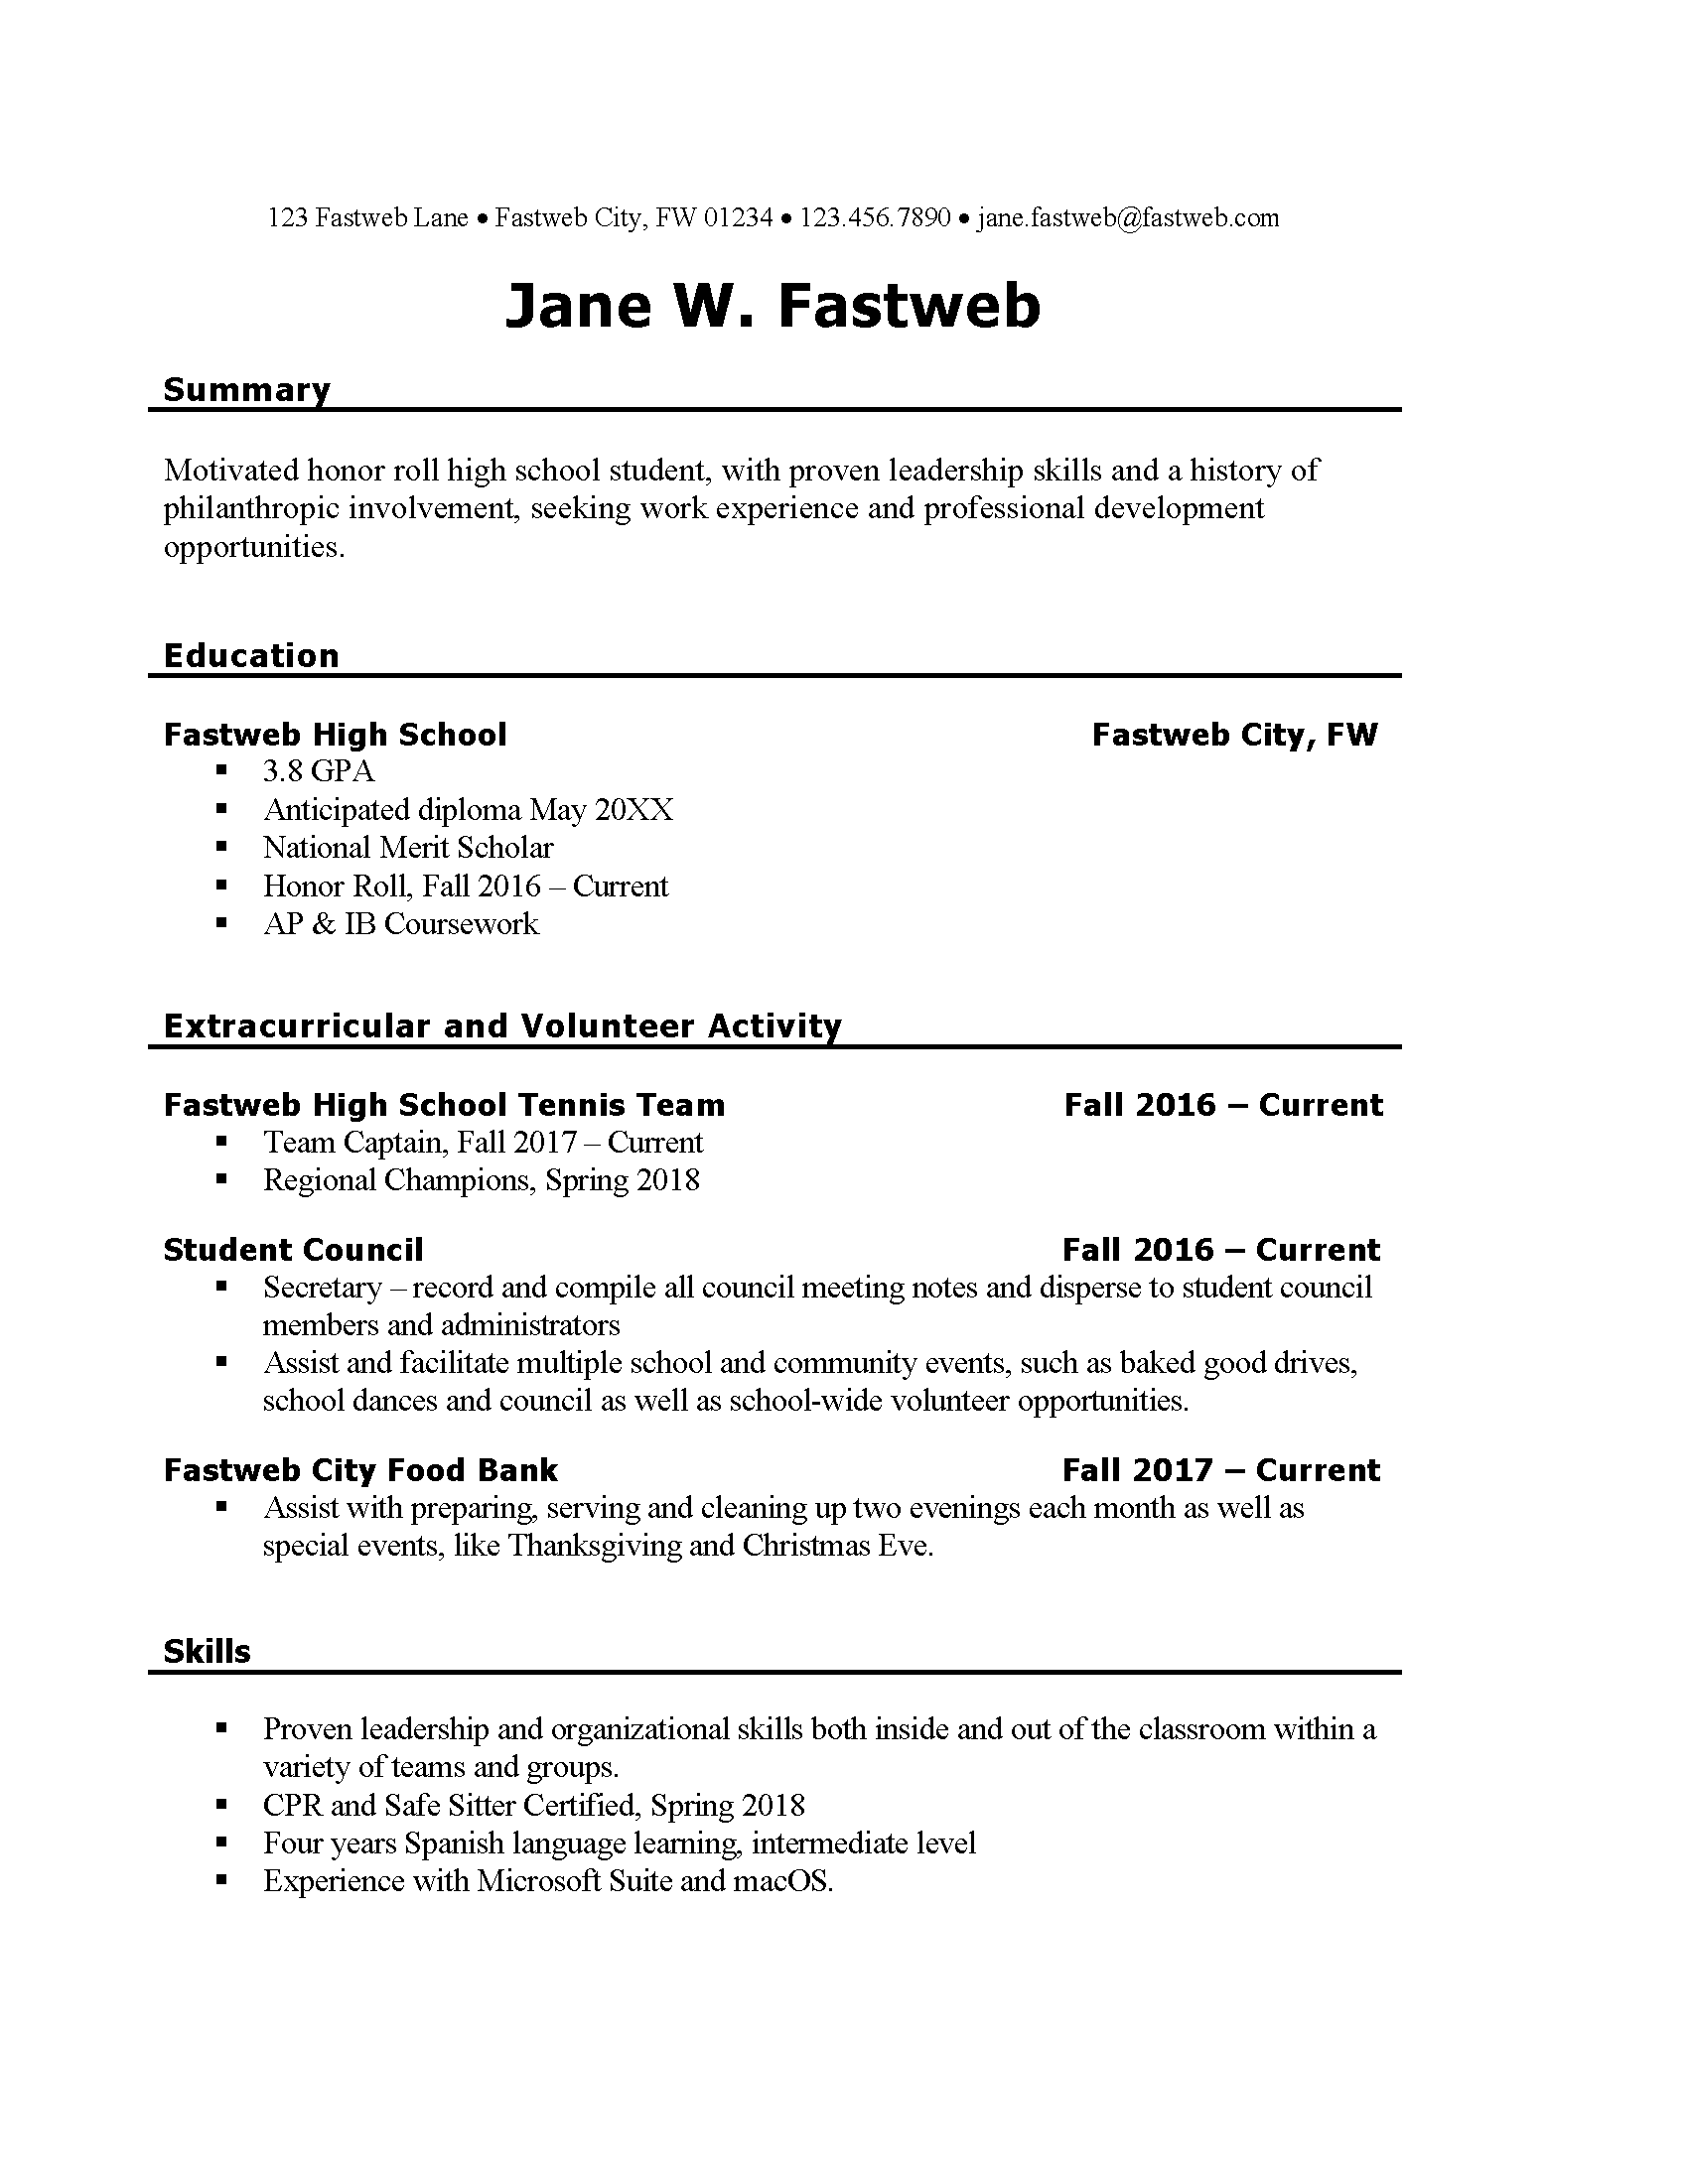 resume template for high school student first job